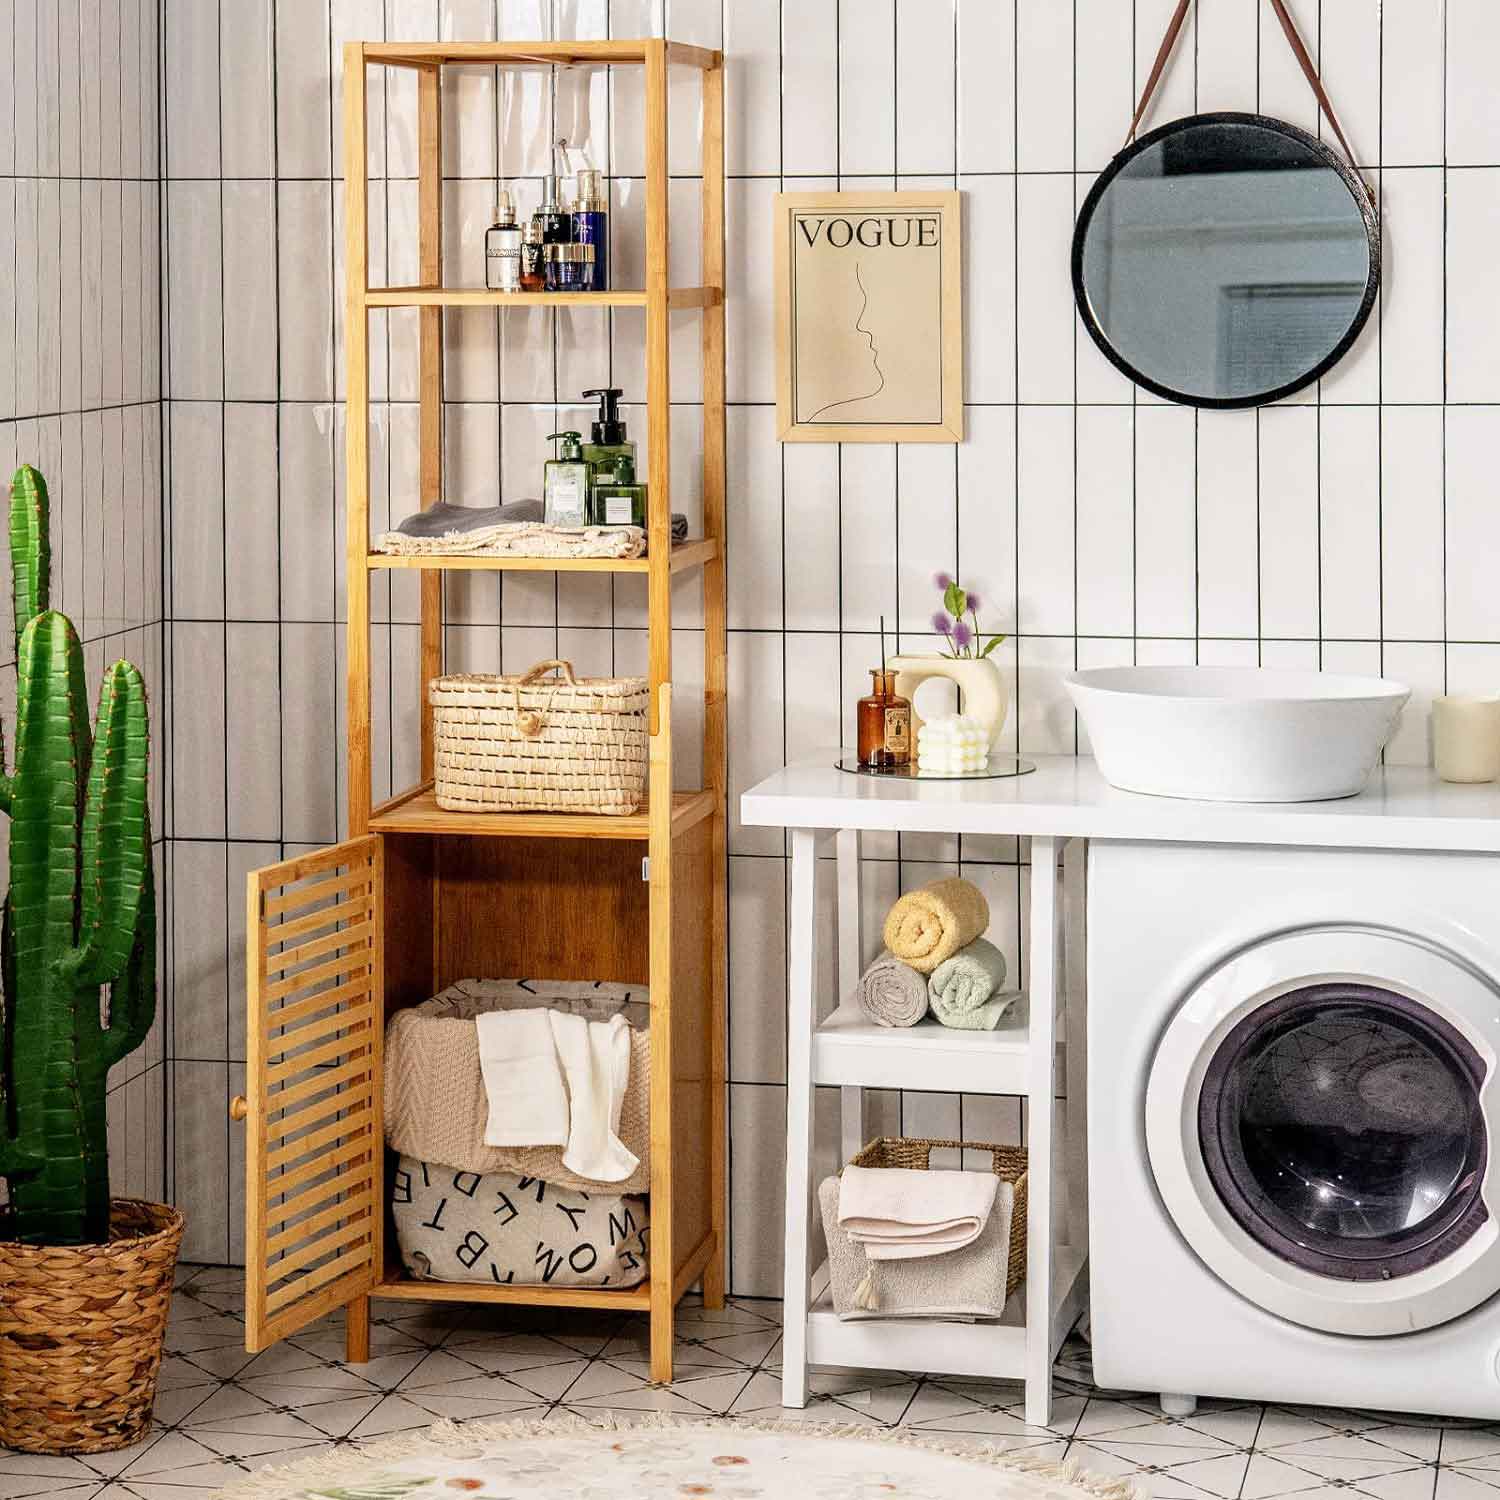 Bathroom with vertical wooden open shelving, washing machine, and round mirror